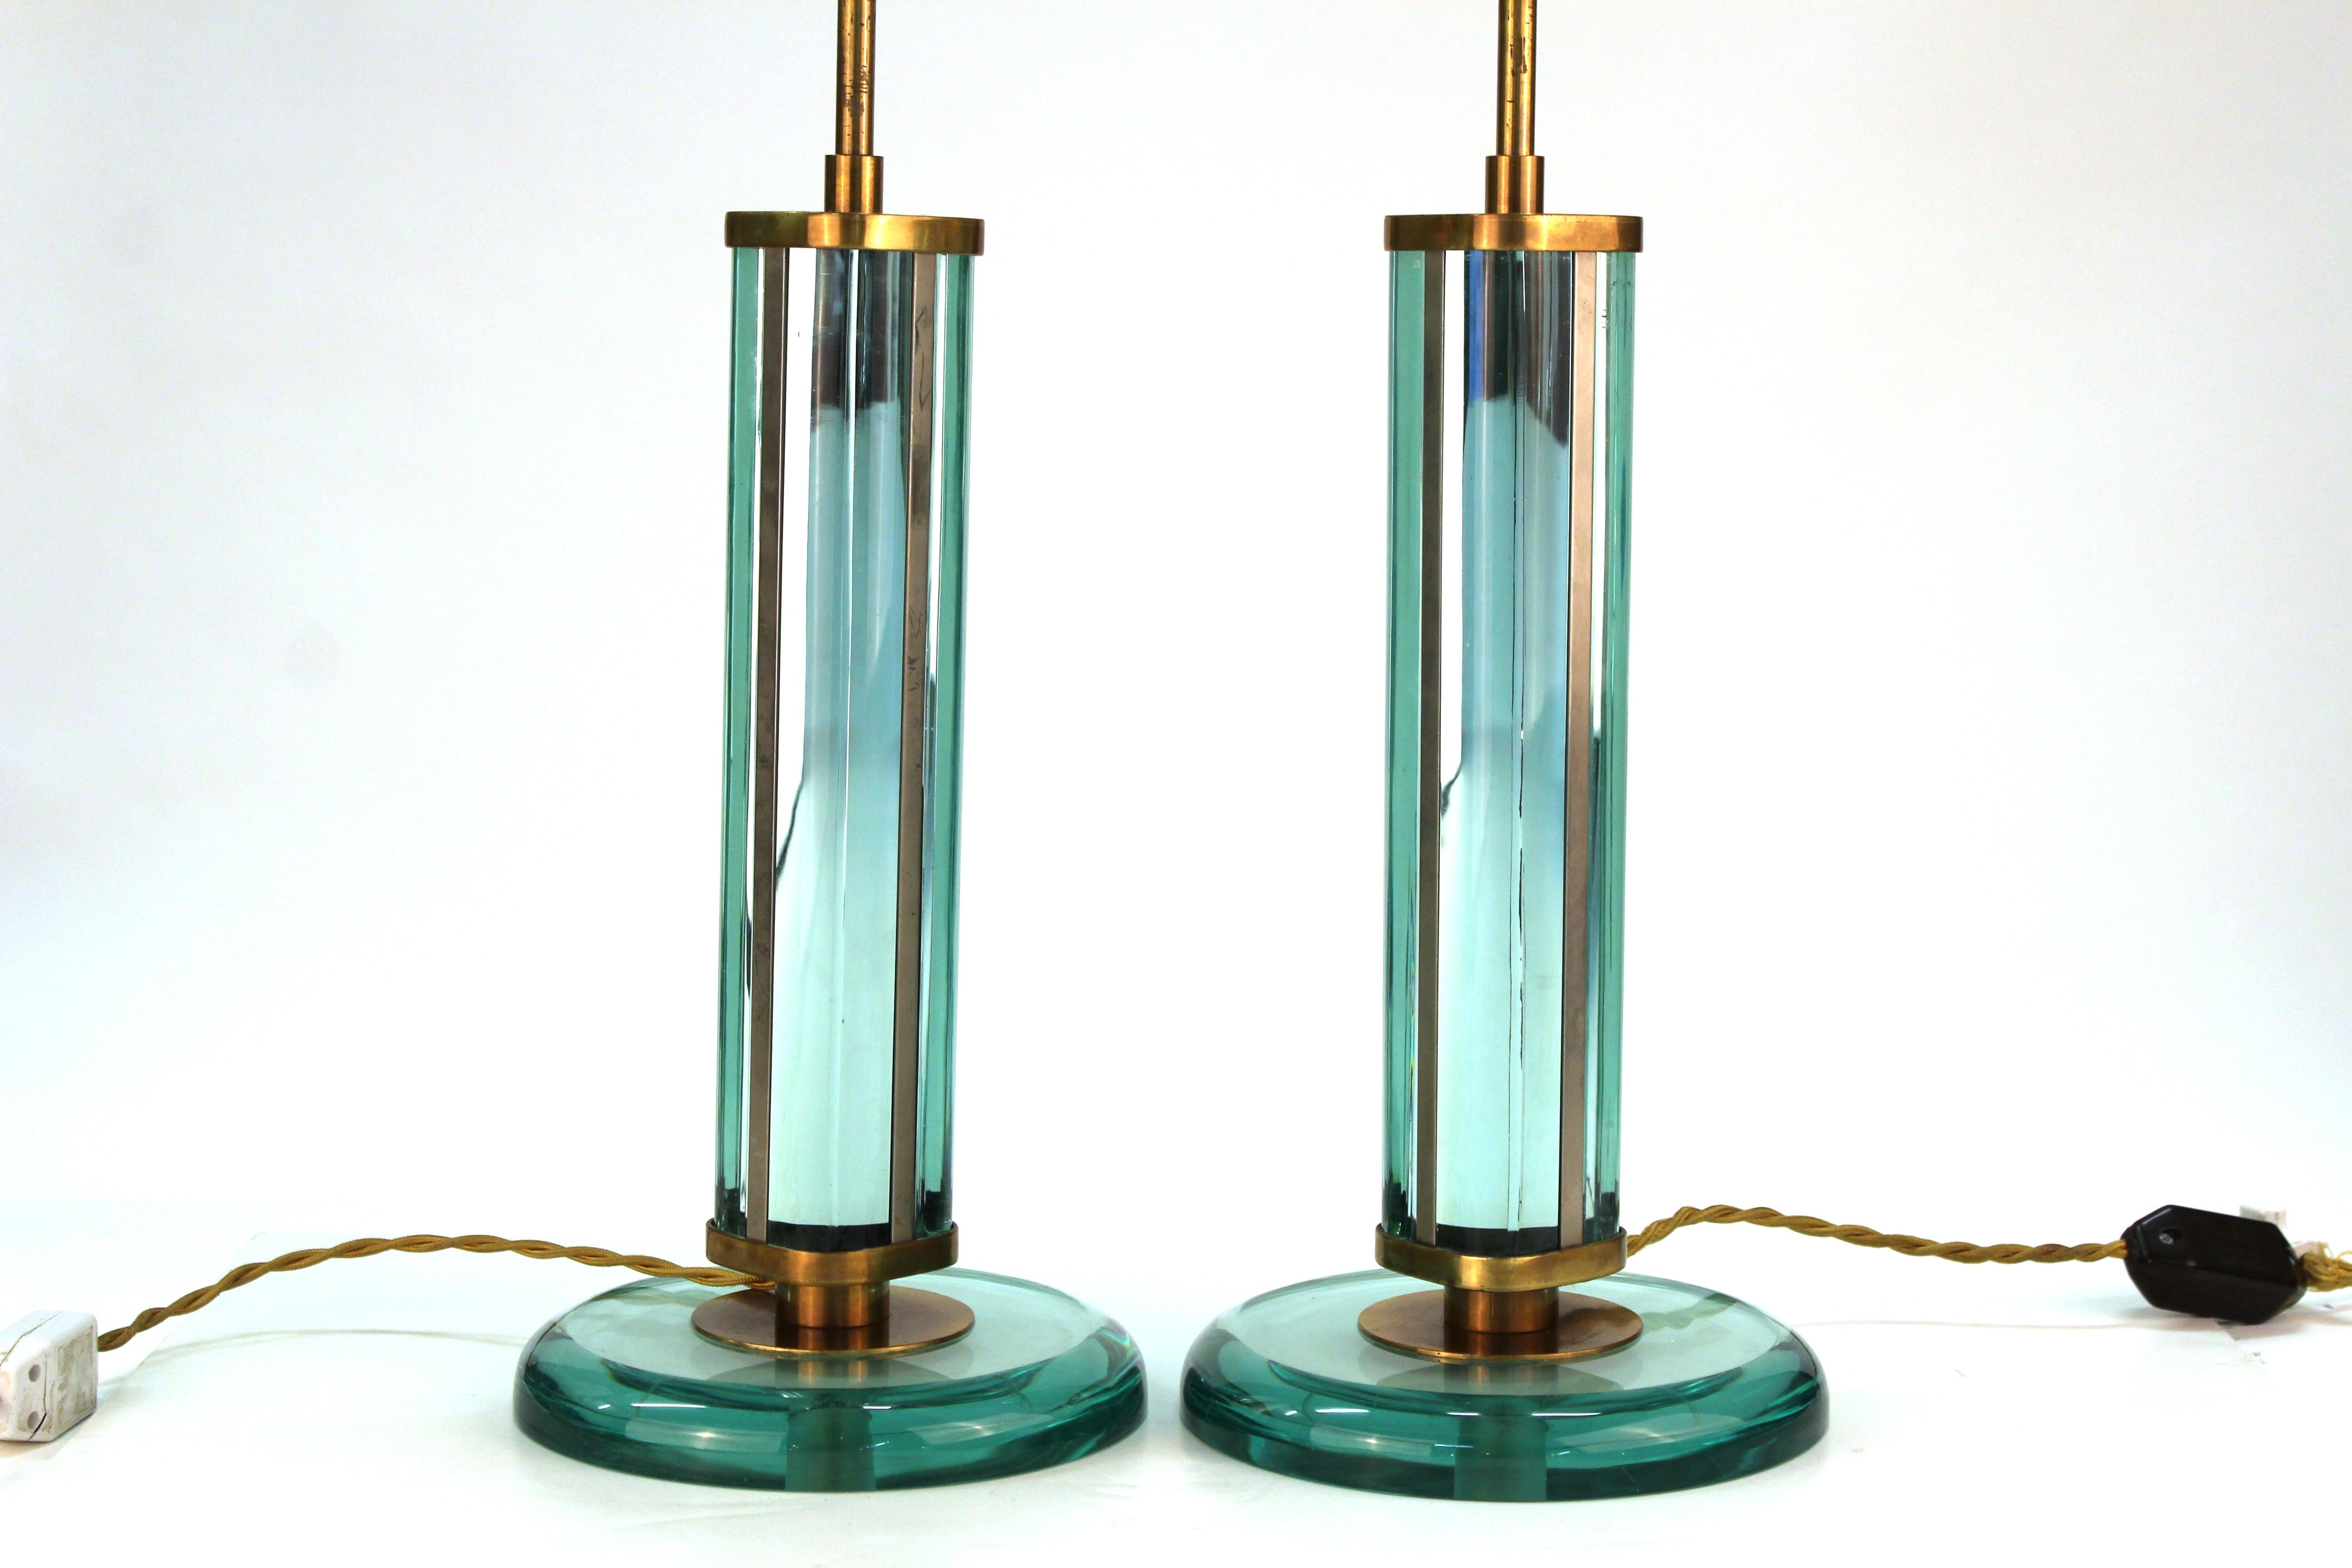 Mid-20th Century Fontana Arte Italian Modernist Table Lamps Attributed to Pietro Chiesa